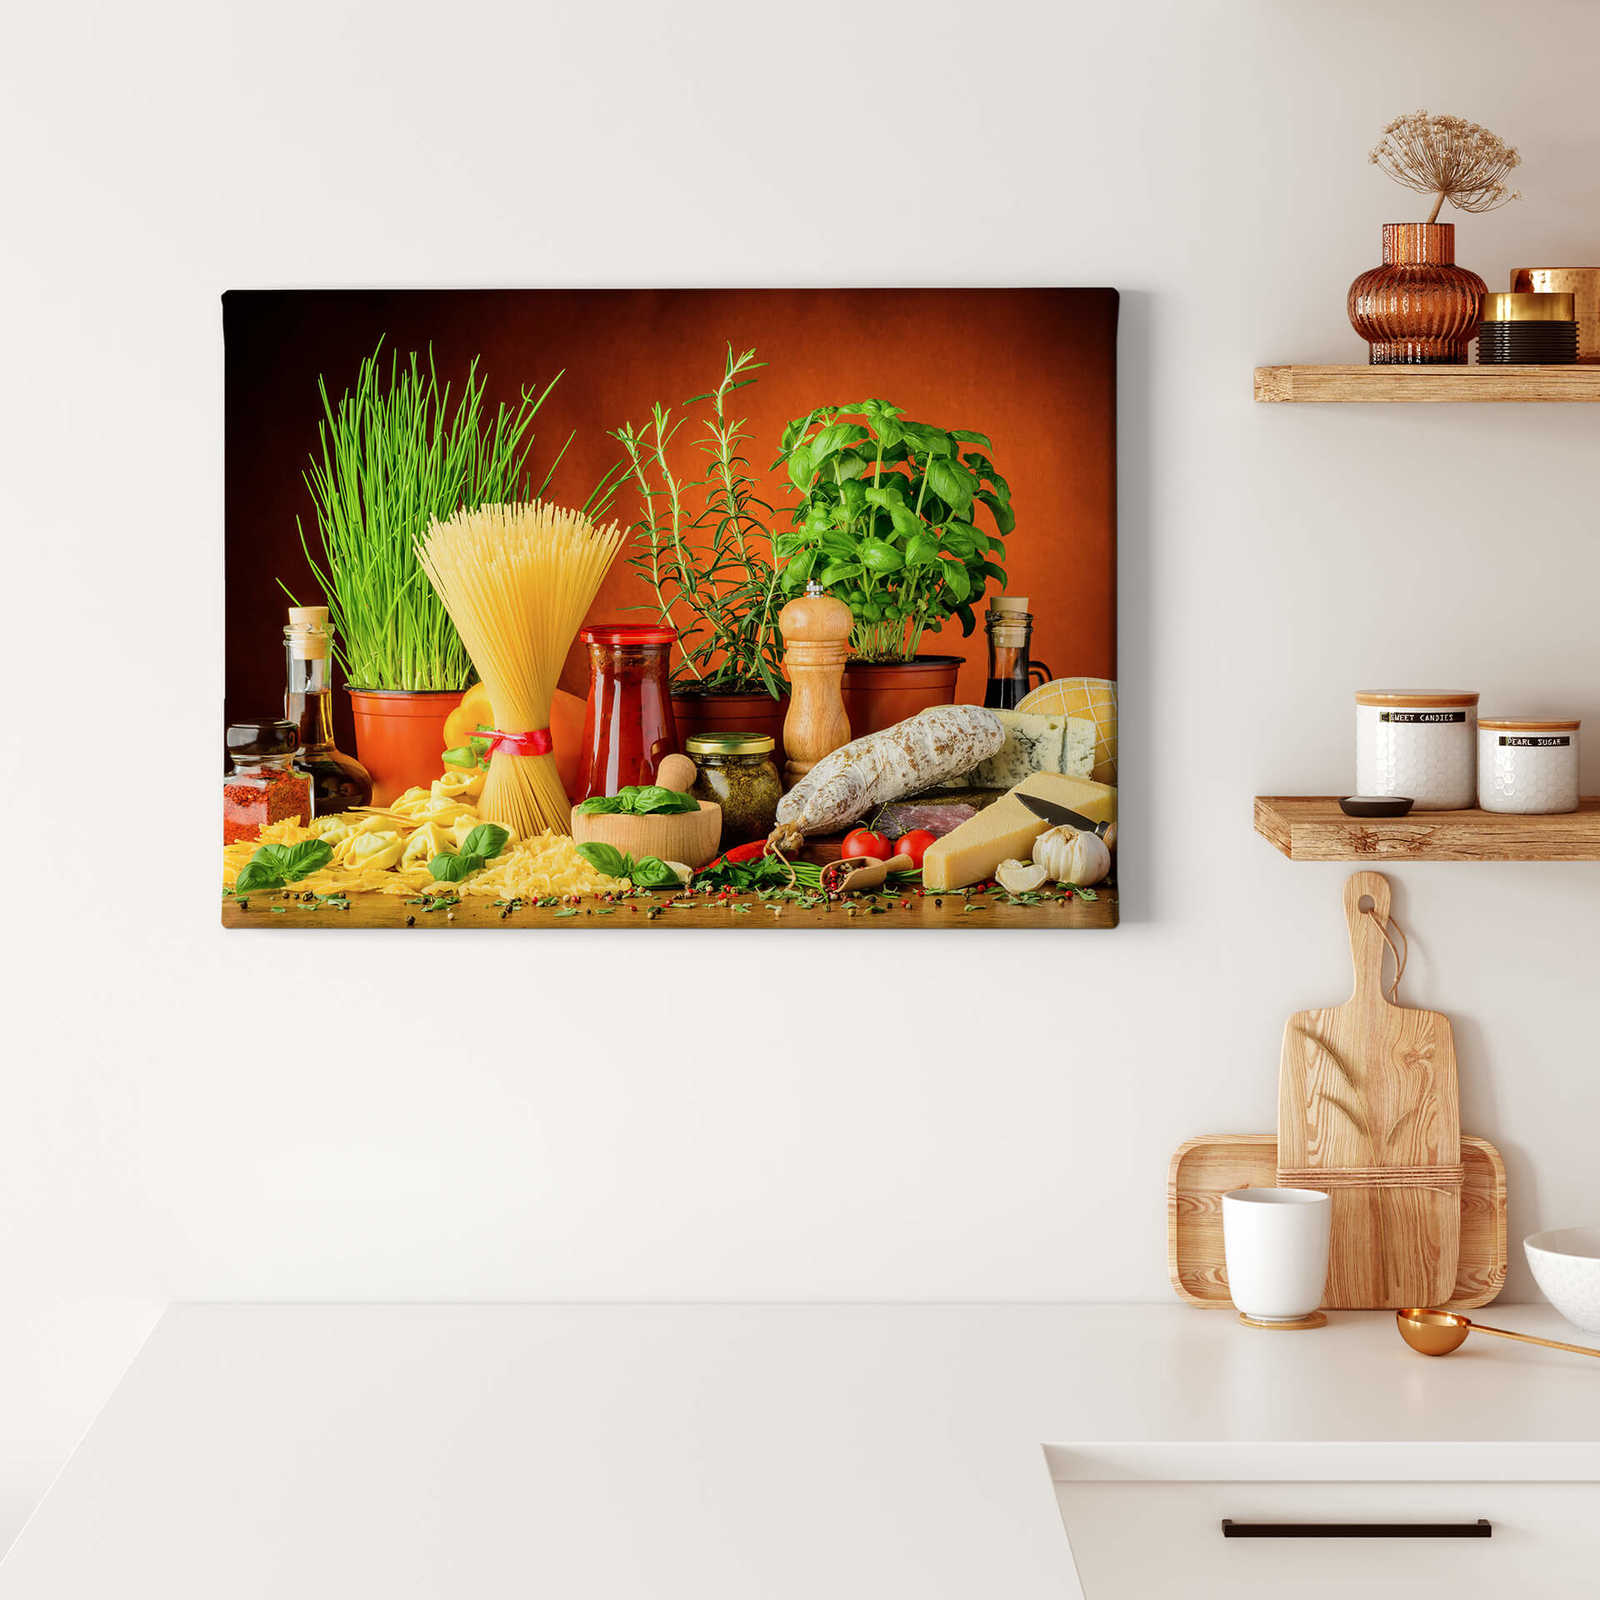             Italian kitchen canvas print with pasta and spices
        